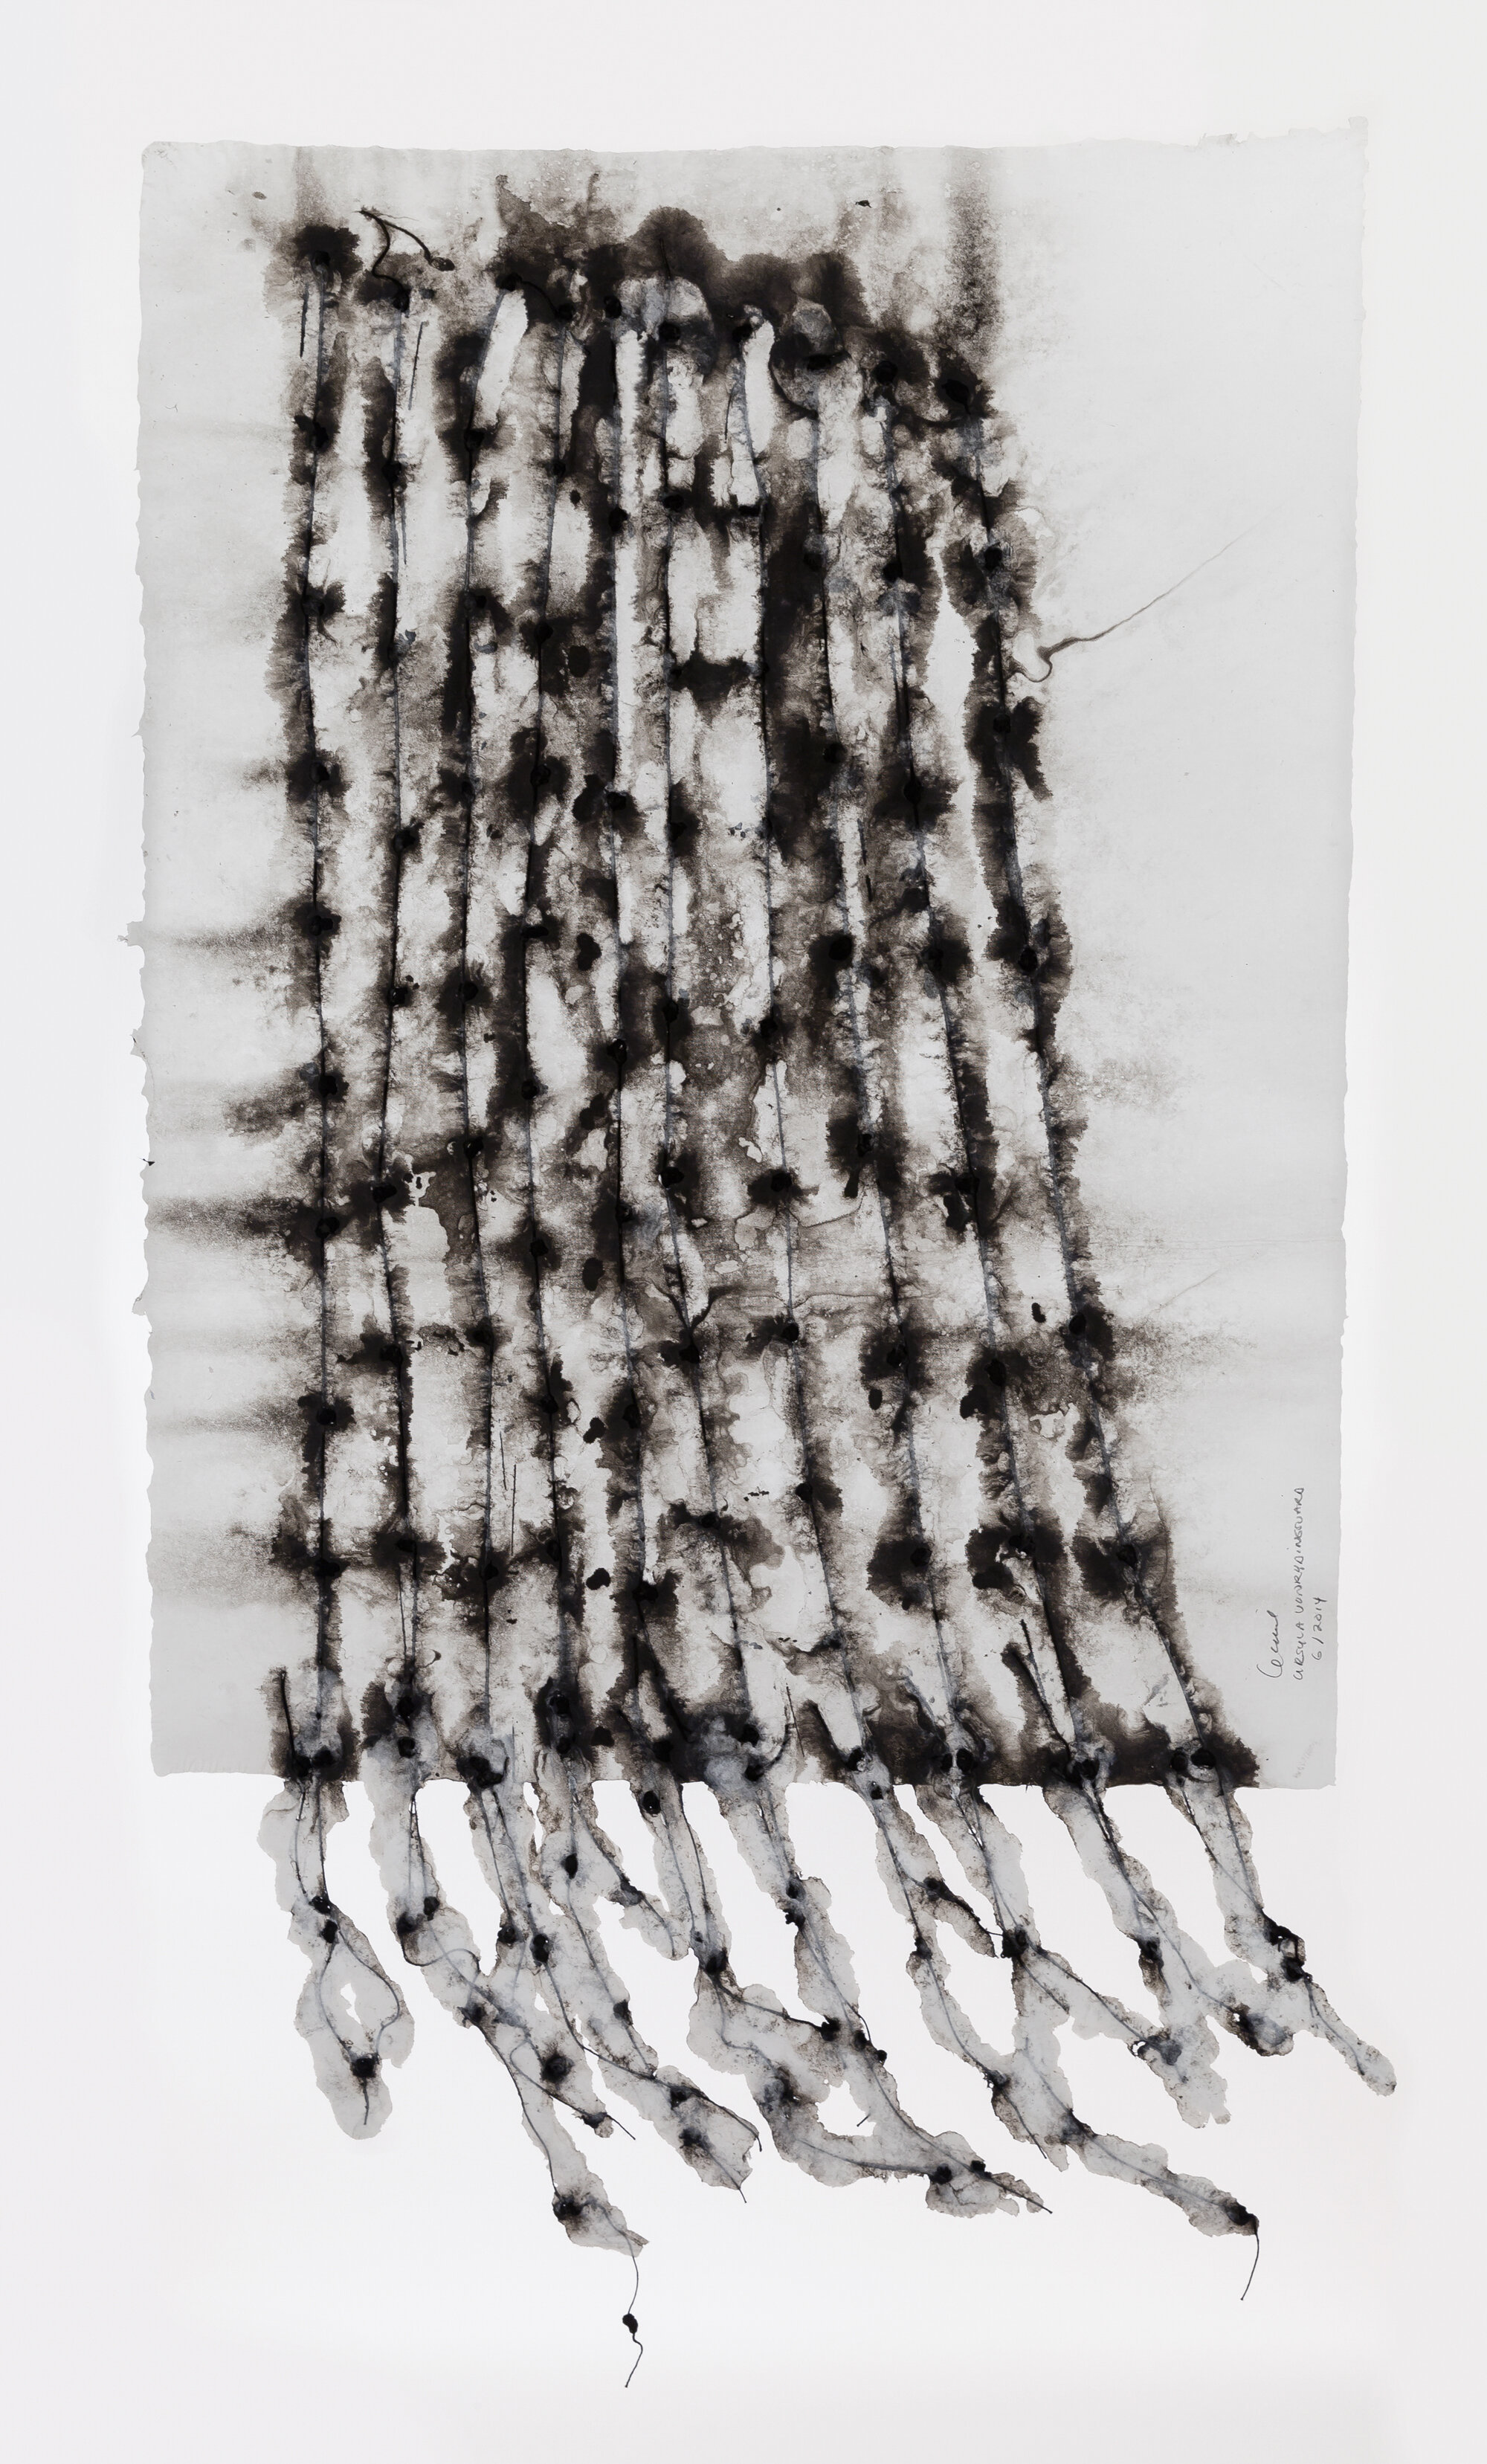   Untitled , 2014 Thread, pigment, and linen handmade paper 40 x 22 in. 